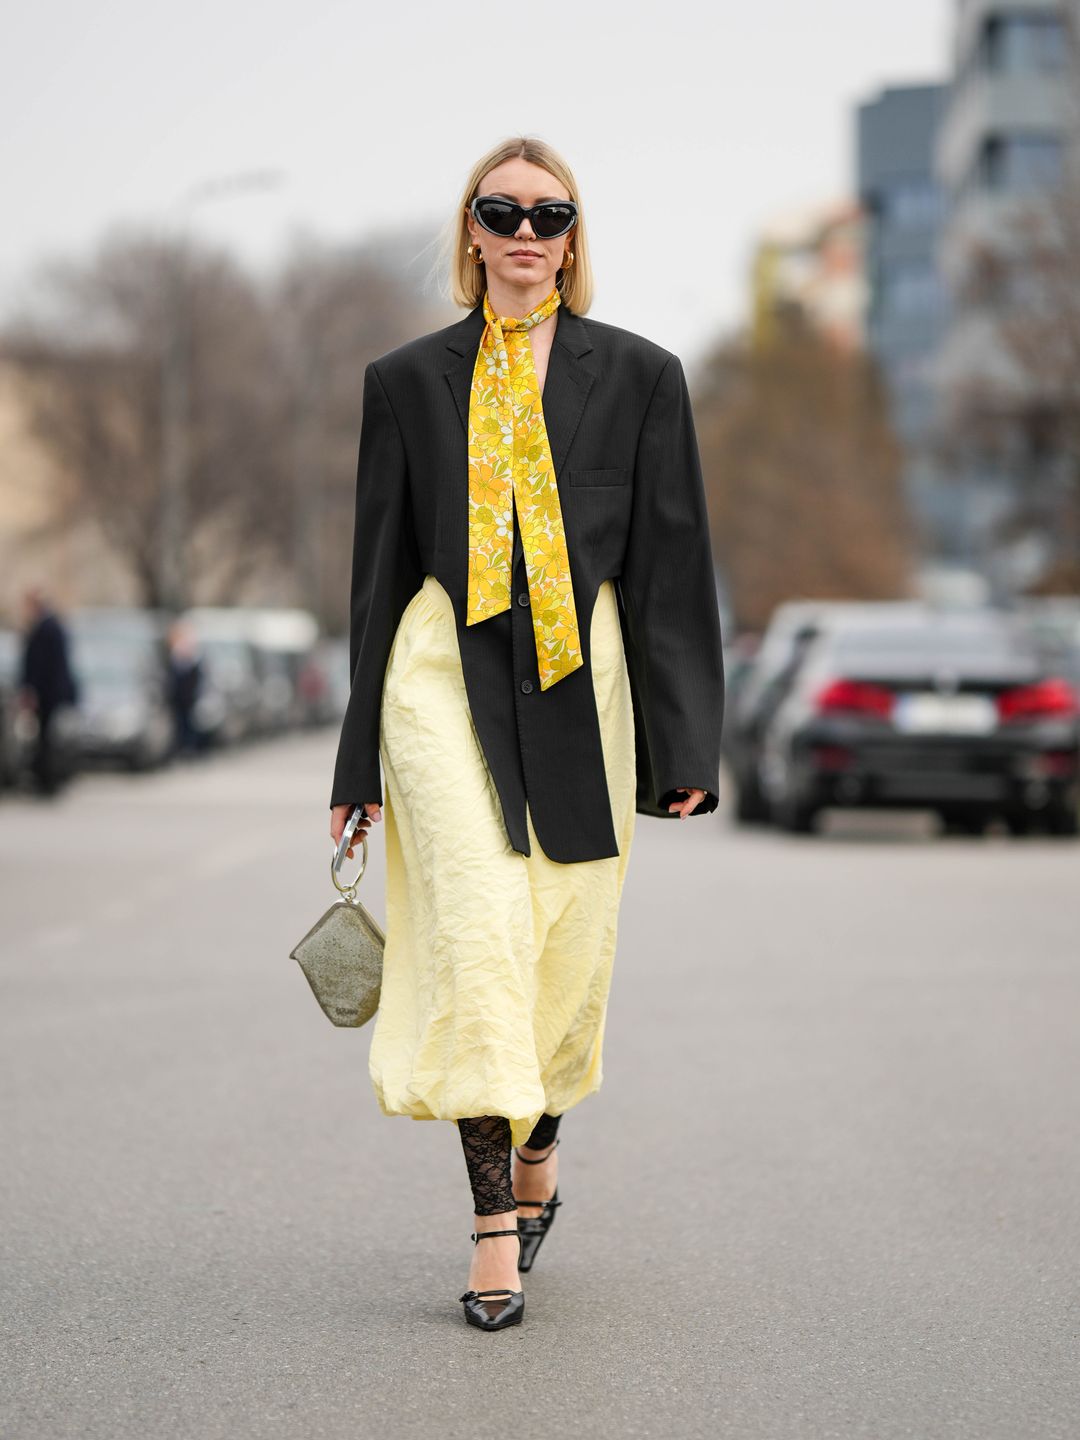 Best winter dresses and 10 easy street style-approved outfits to ...